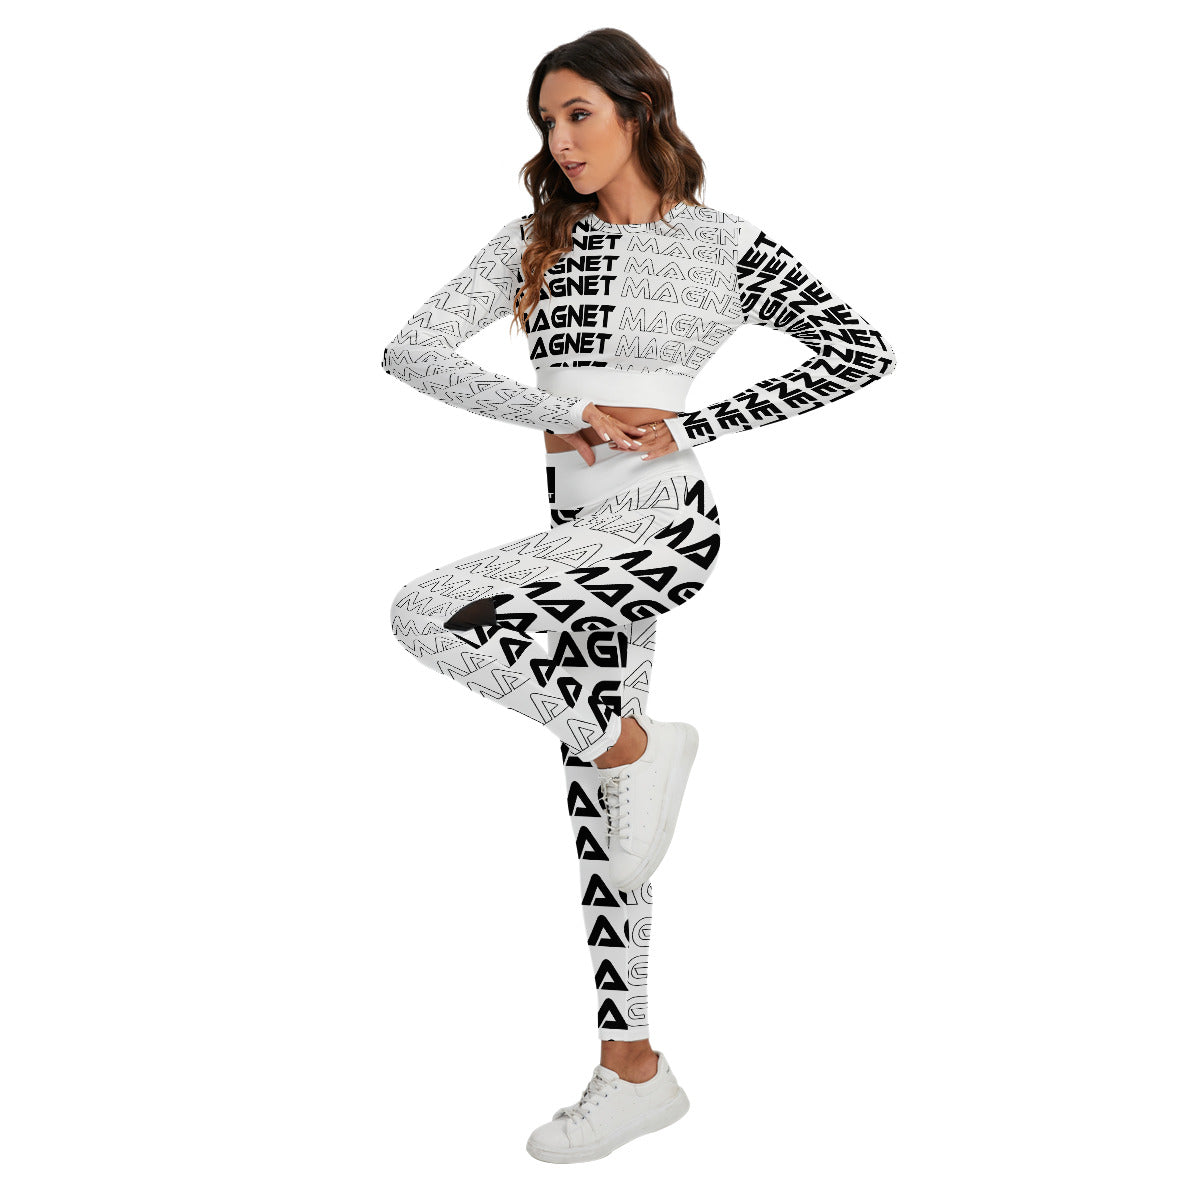 Magnet vogue Women's Sport Set With Backless Top And Leggings